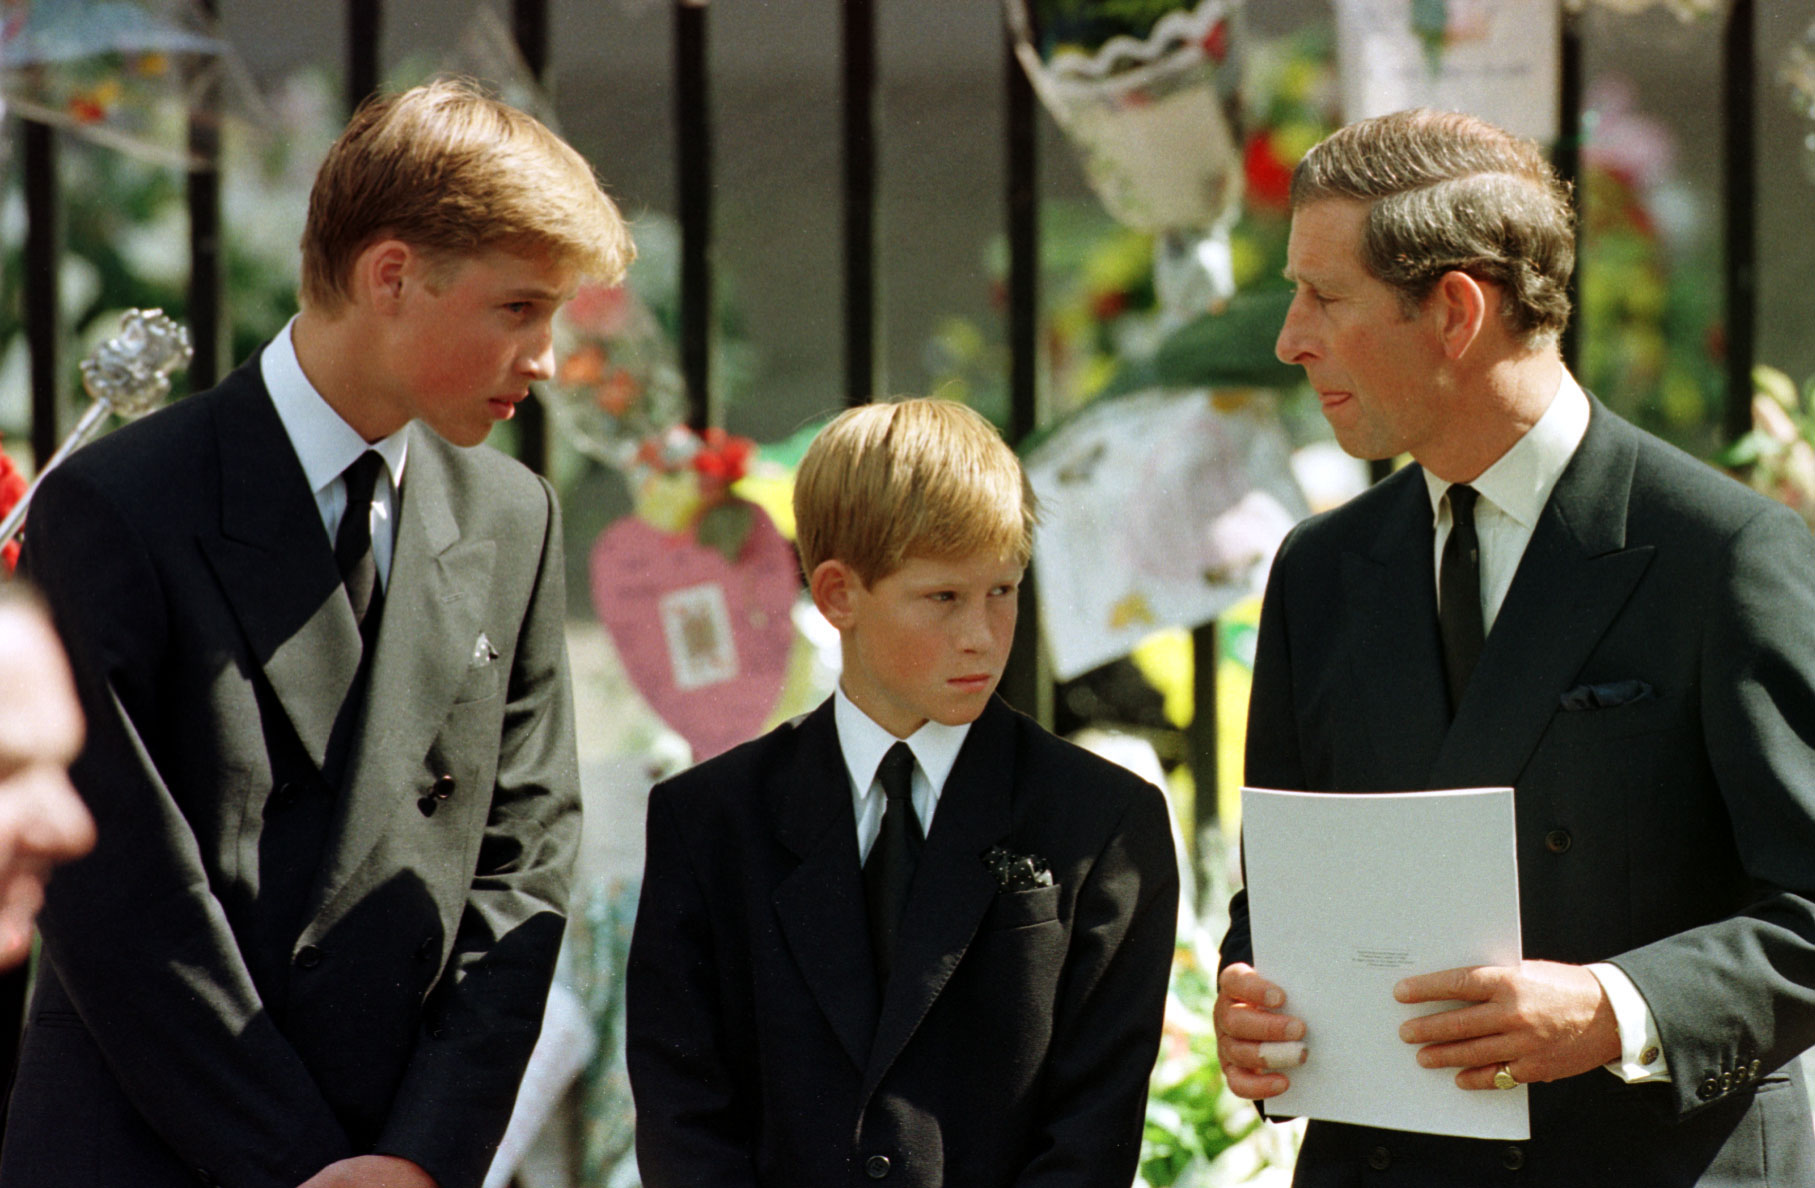 Charles Prince of Wales, Prince William, and Prince Harry during Diana, Princess of Wales' funeral on September 6, 1997 at Westminster Abbey, London | Source: Getty Images